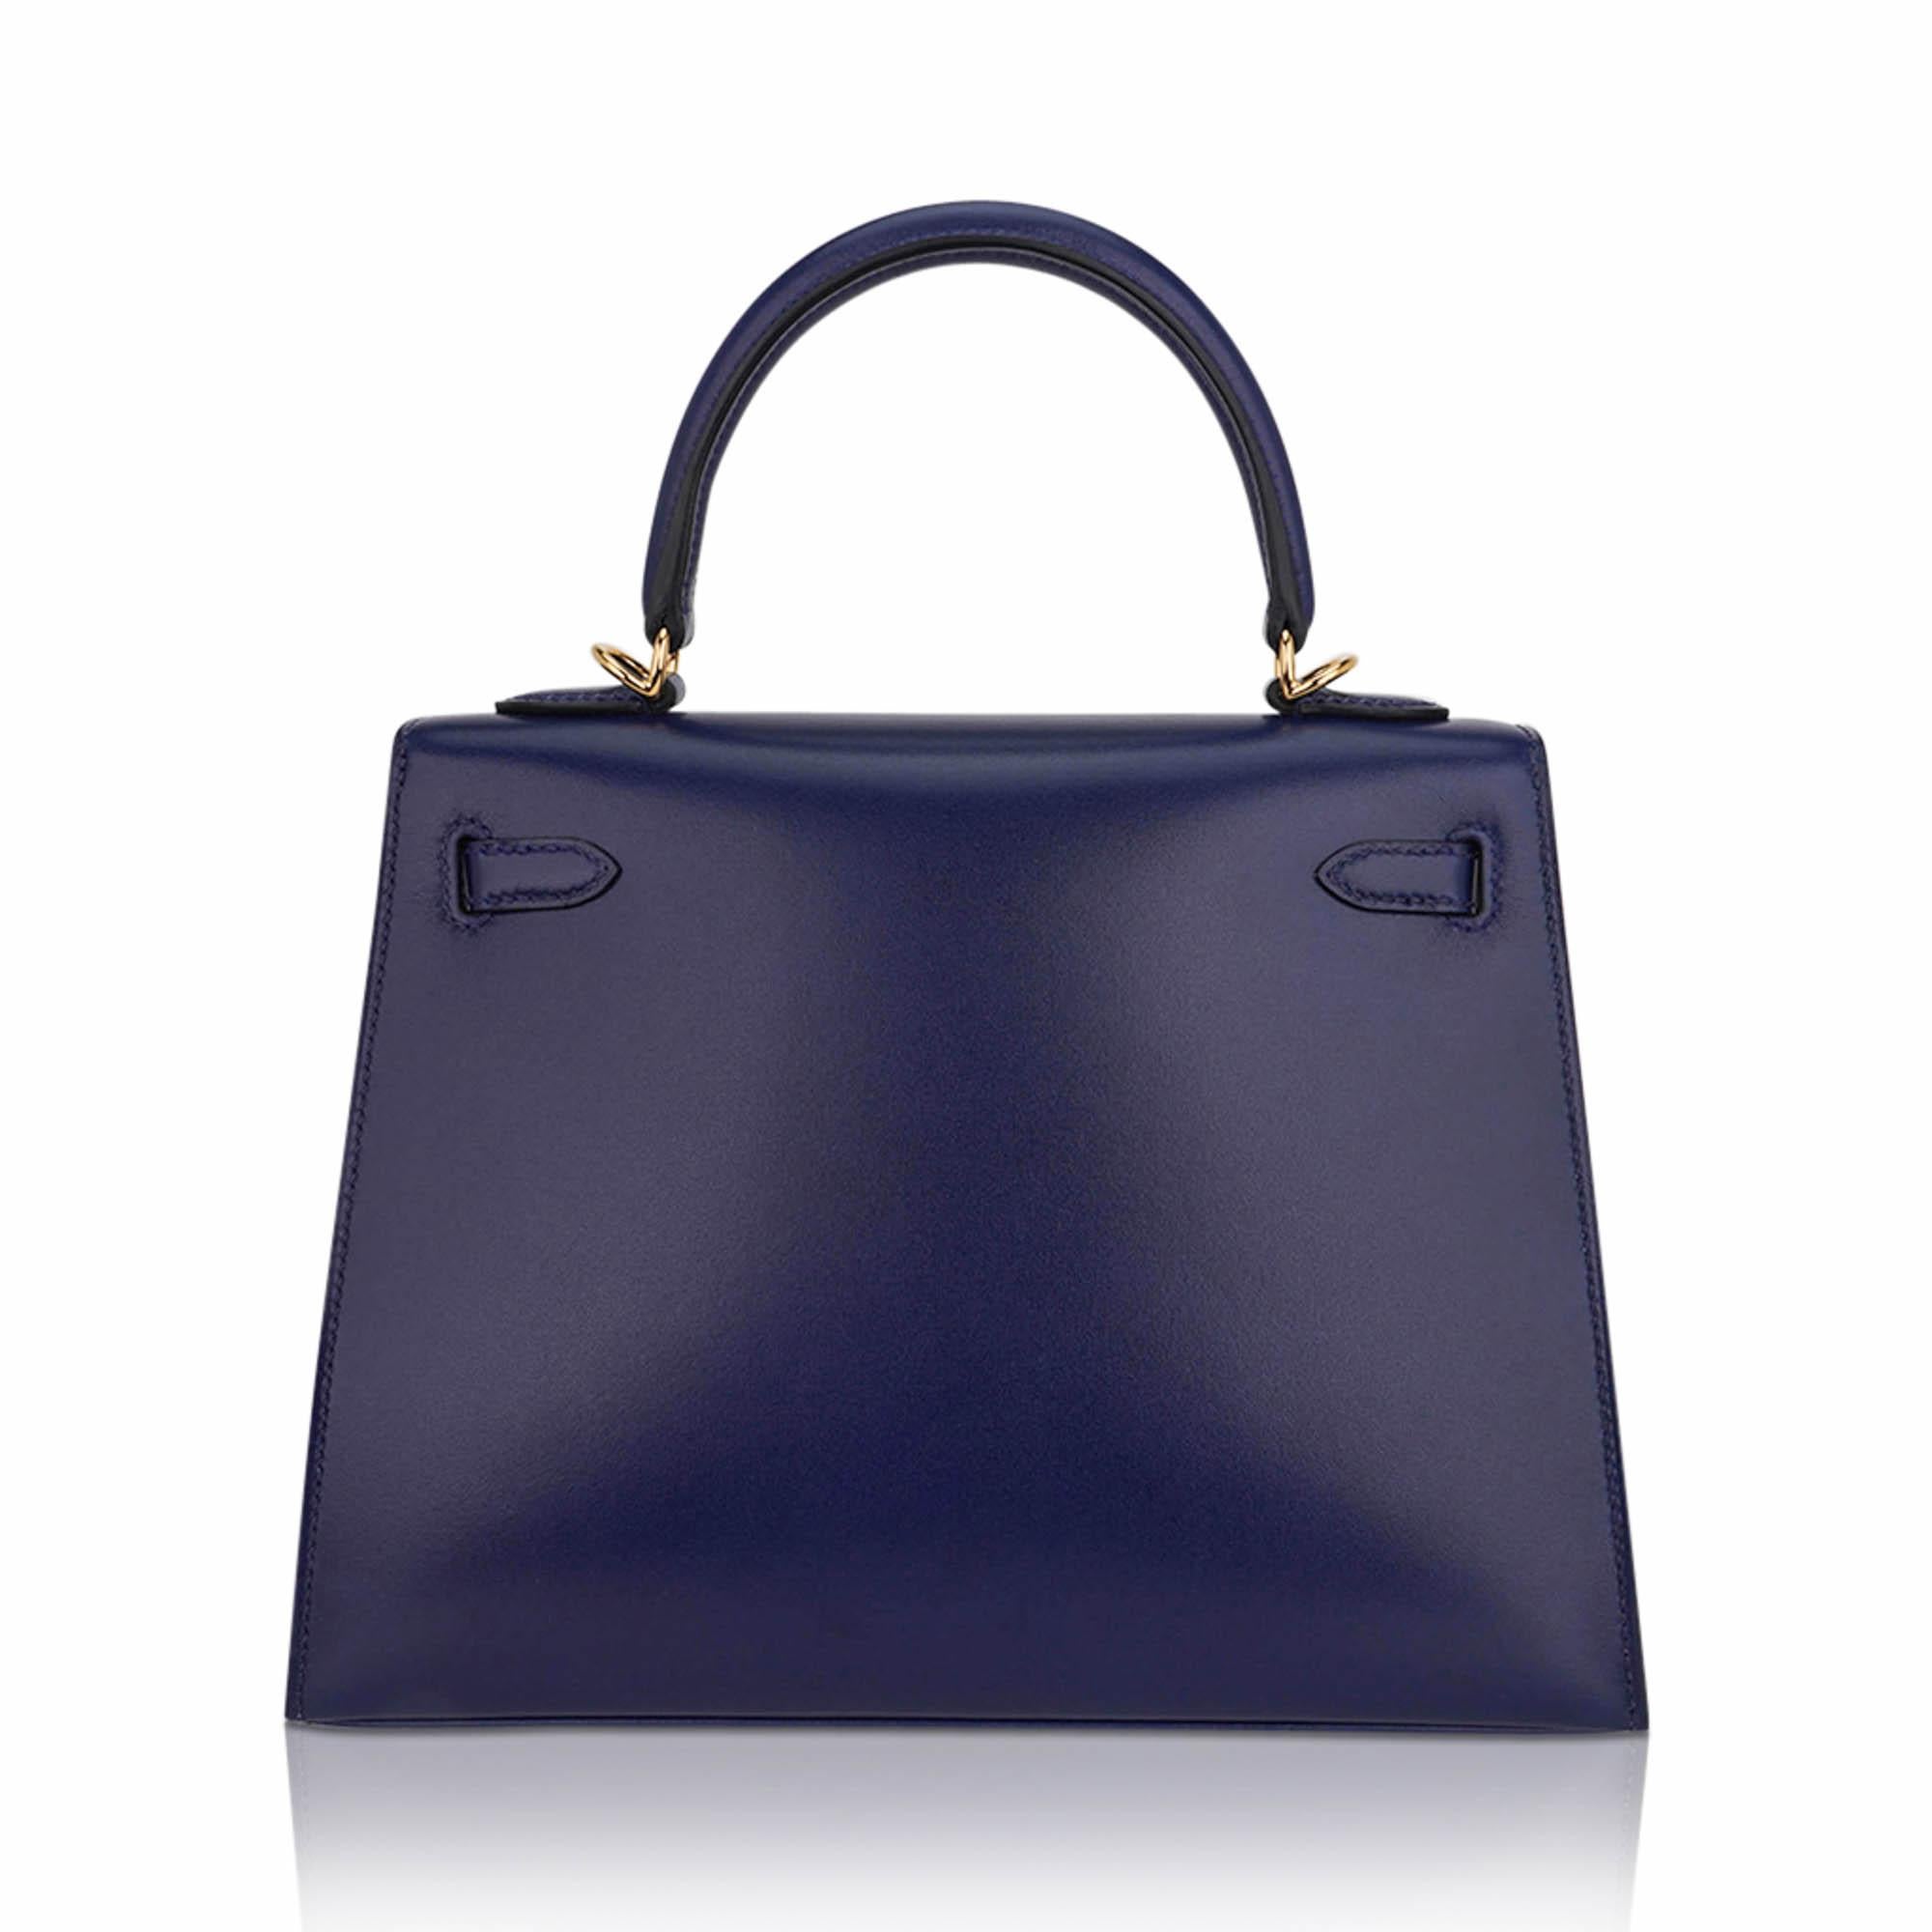 Hermes Kelly 25 Sellier Blue Sapphire Box Leather Bag Gold Hardware For Sale 1